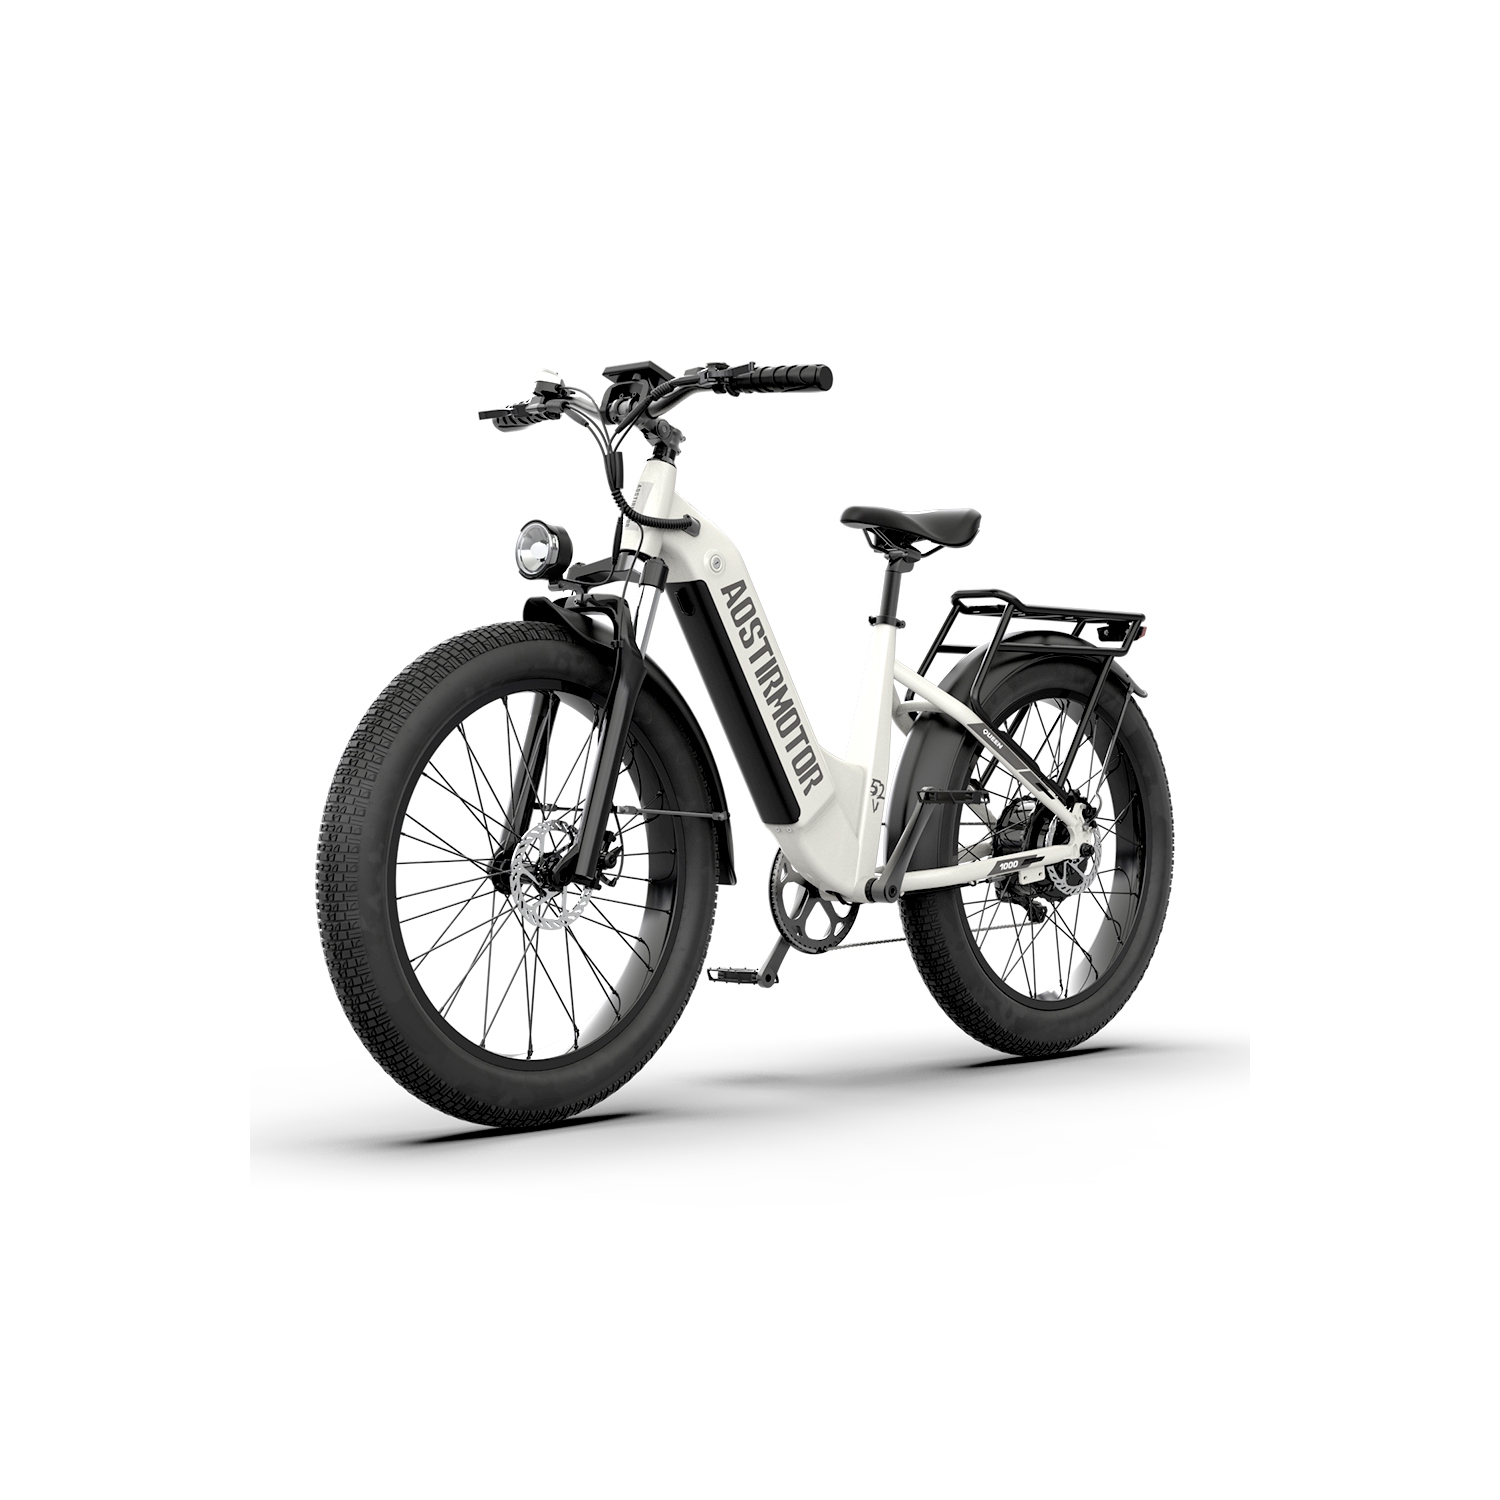 AOSTIRMOTOR new pattern 26" 1000W Electric Bike Fat Tire 52V15AH Removable Lithium Battery for Adults QUEEN （Flagship）